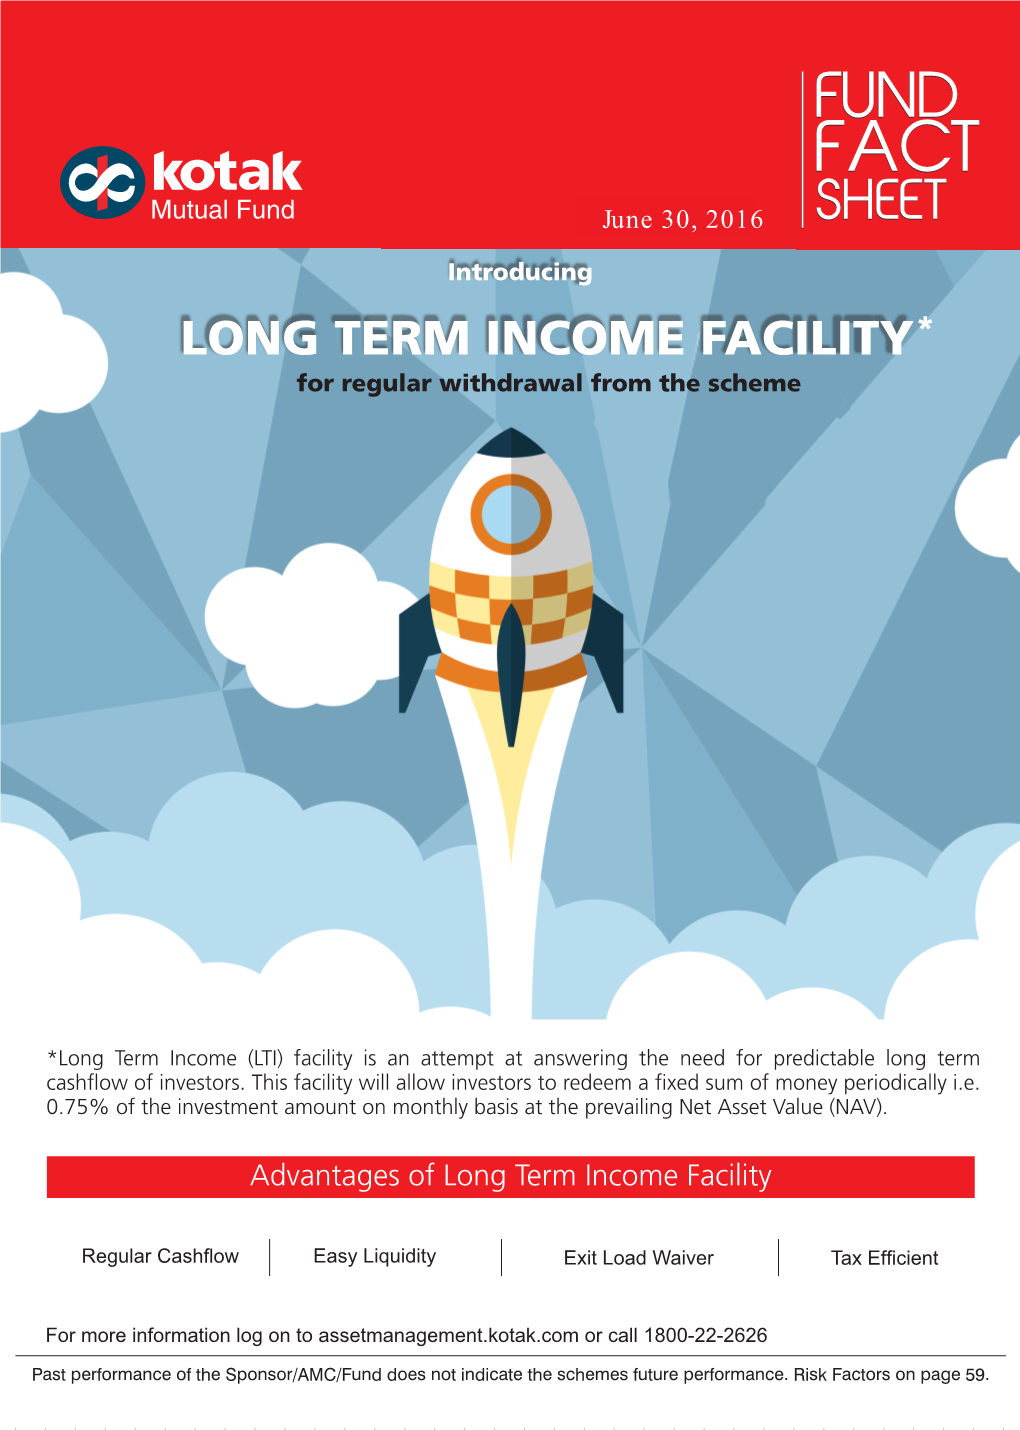 LONG TERM INCOME FACILITY* for Regular Withdrawal from the Scheme